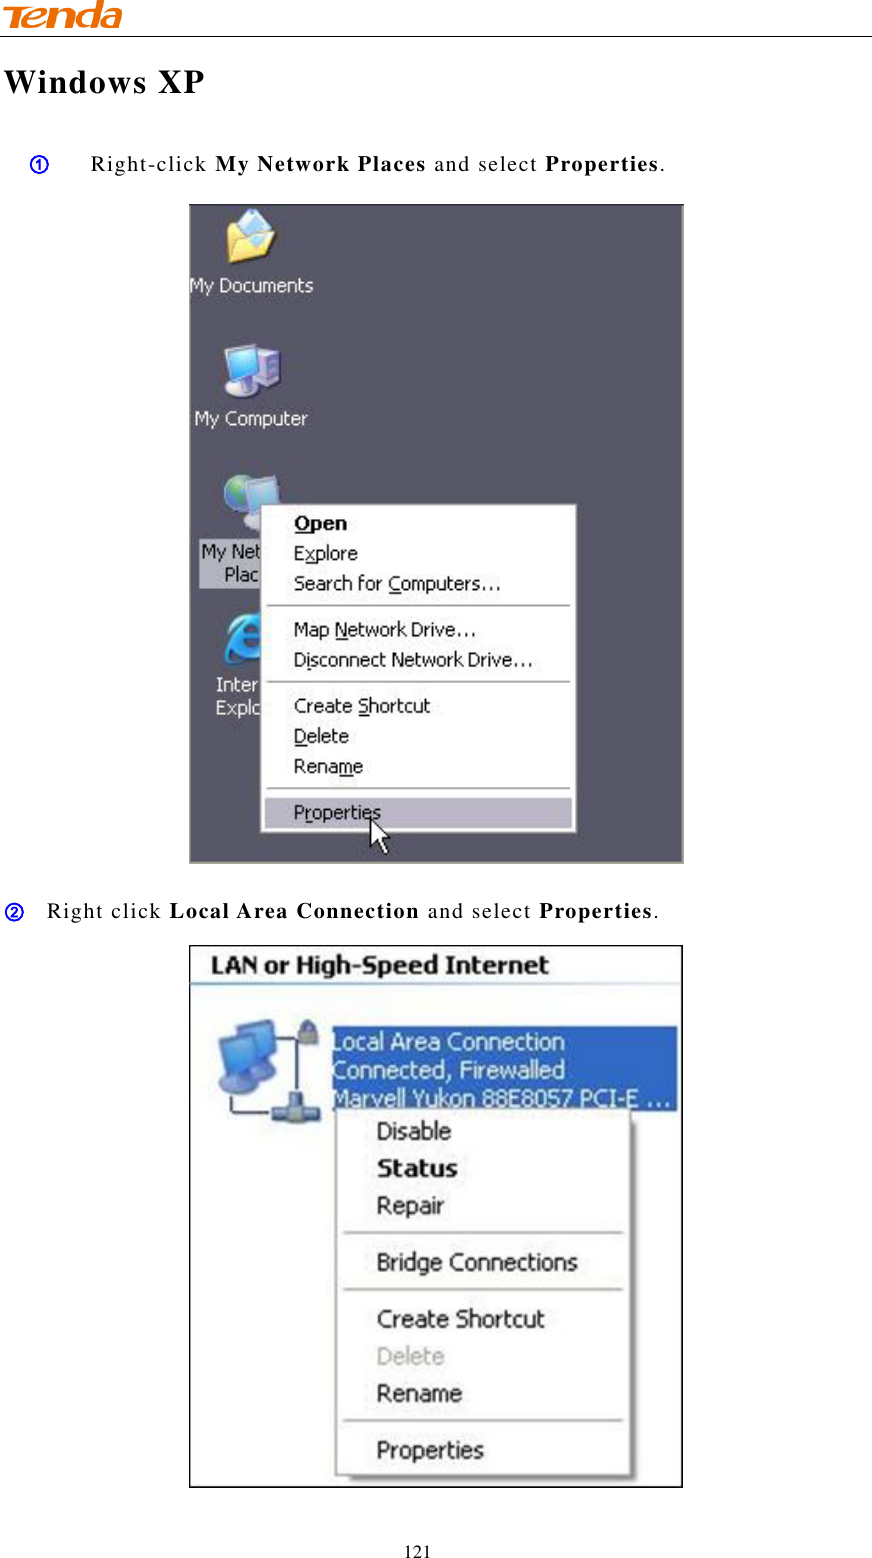                                    121 Windows XP ① Right-click My Network Places and select Properties.  ② Right click Local Area Connection and select Properties.  